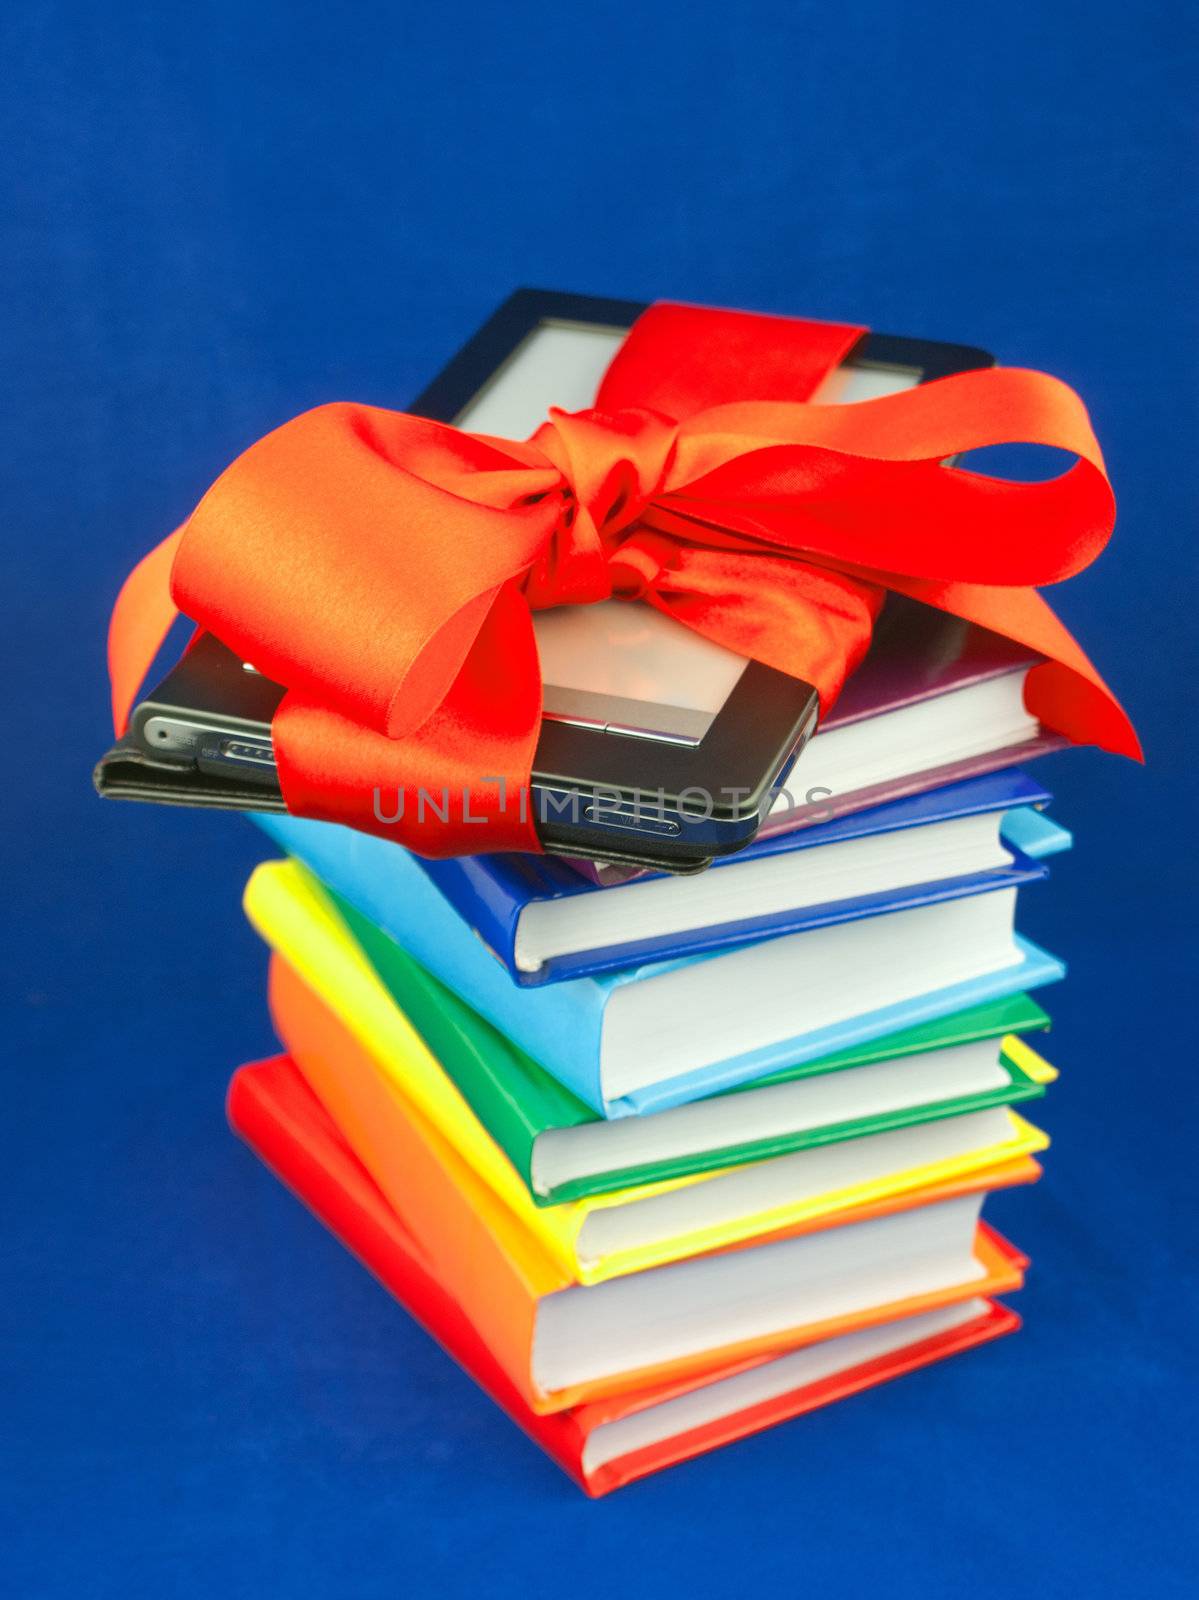 Electronic book reader tied up with red ribbon on the stack of books